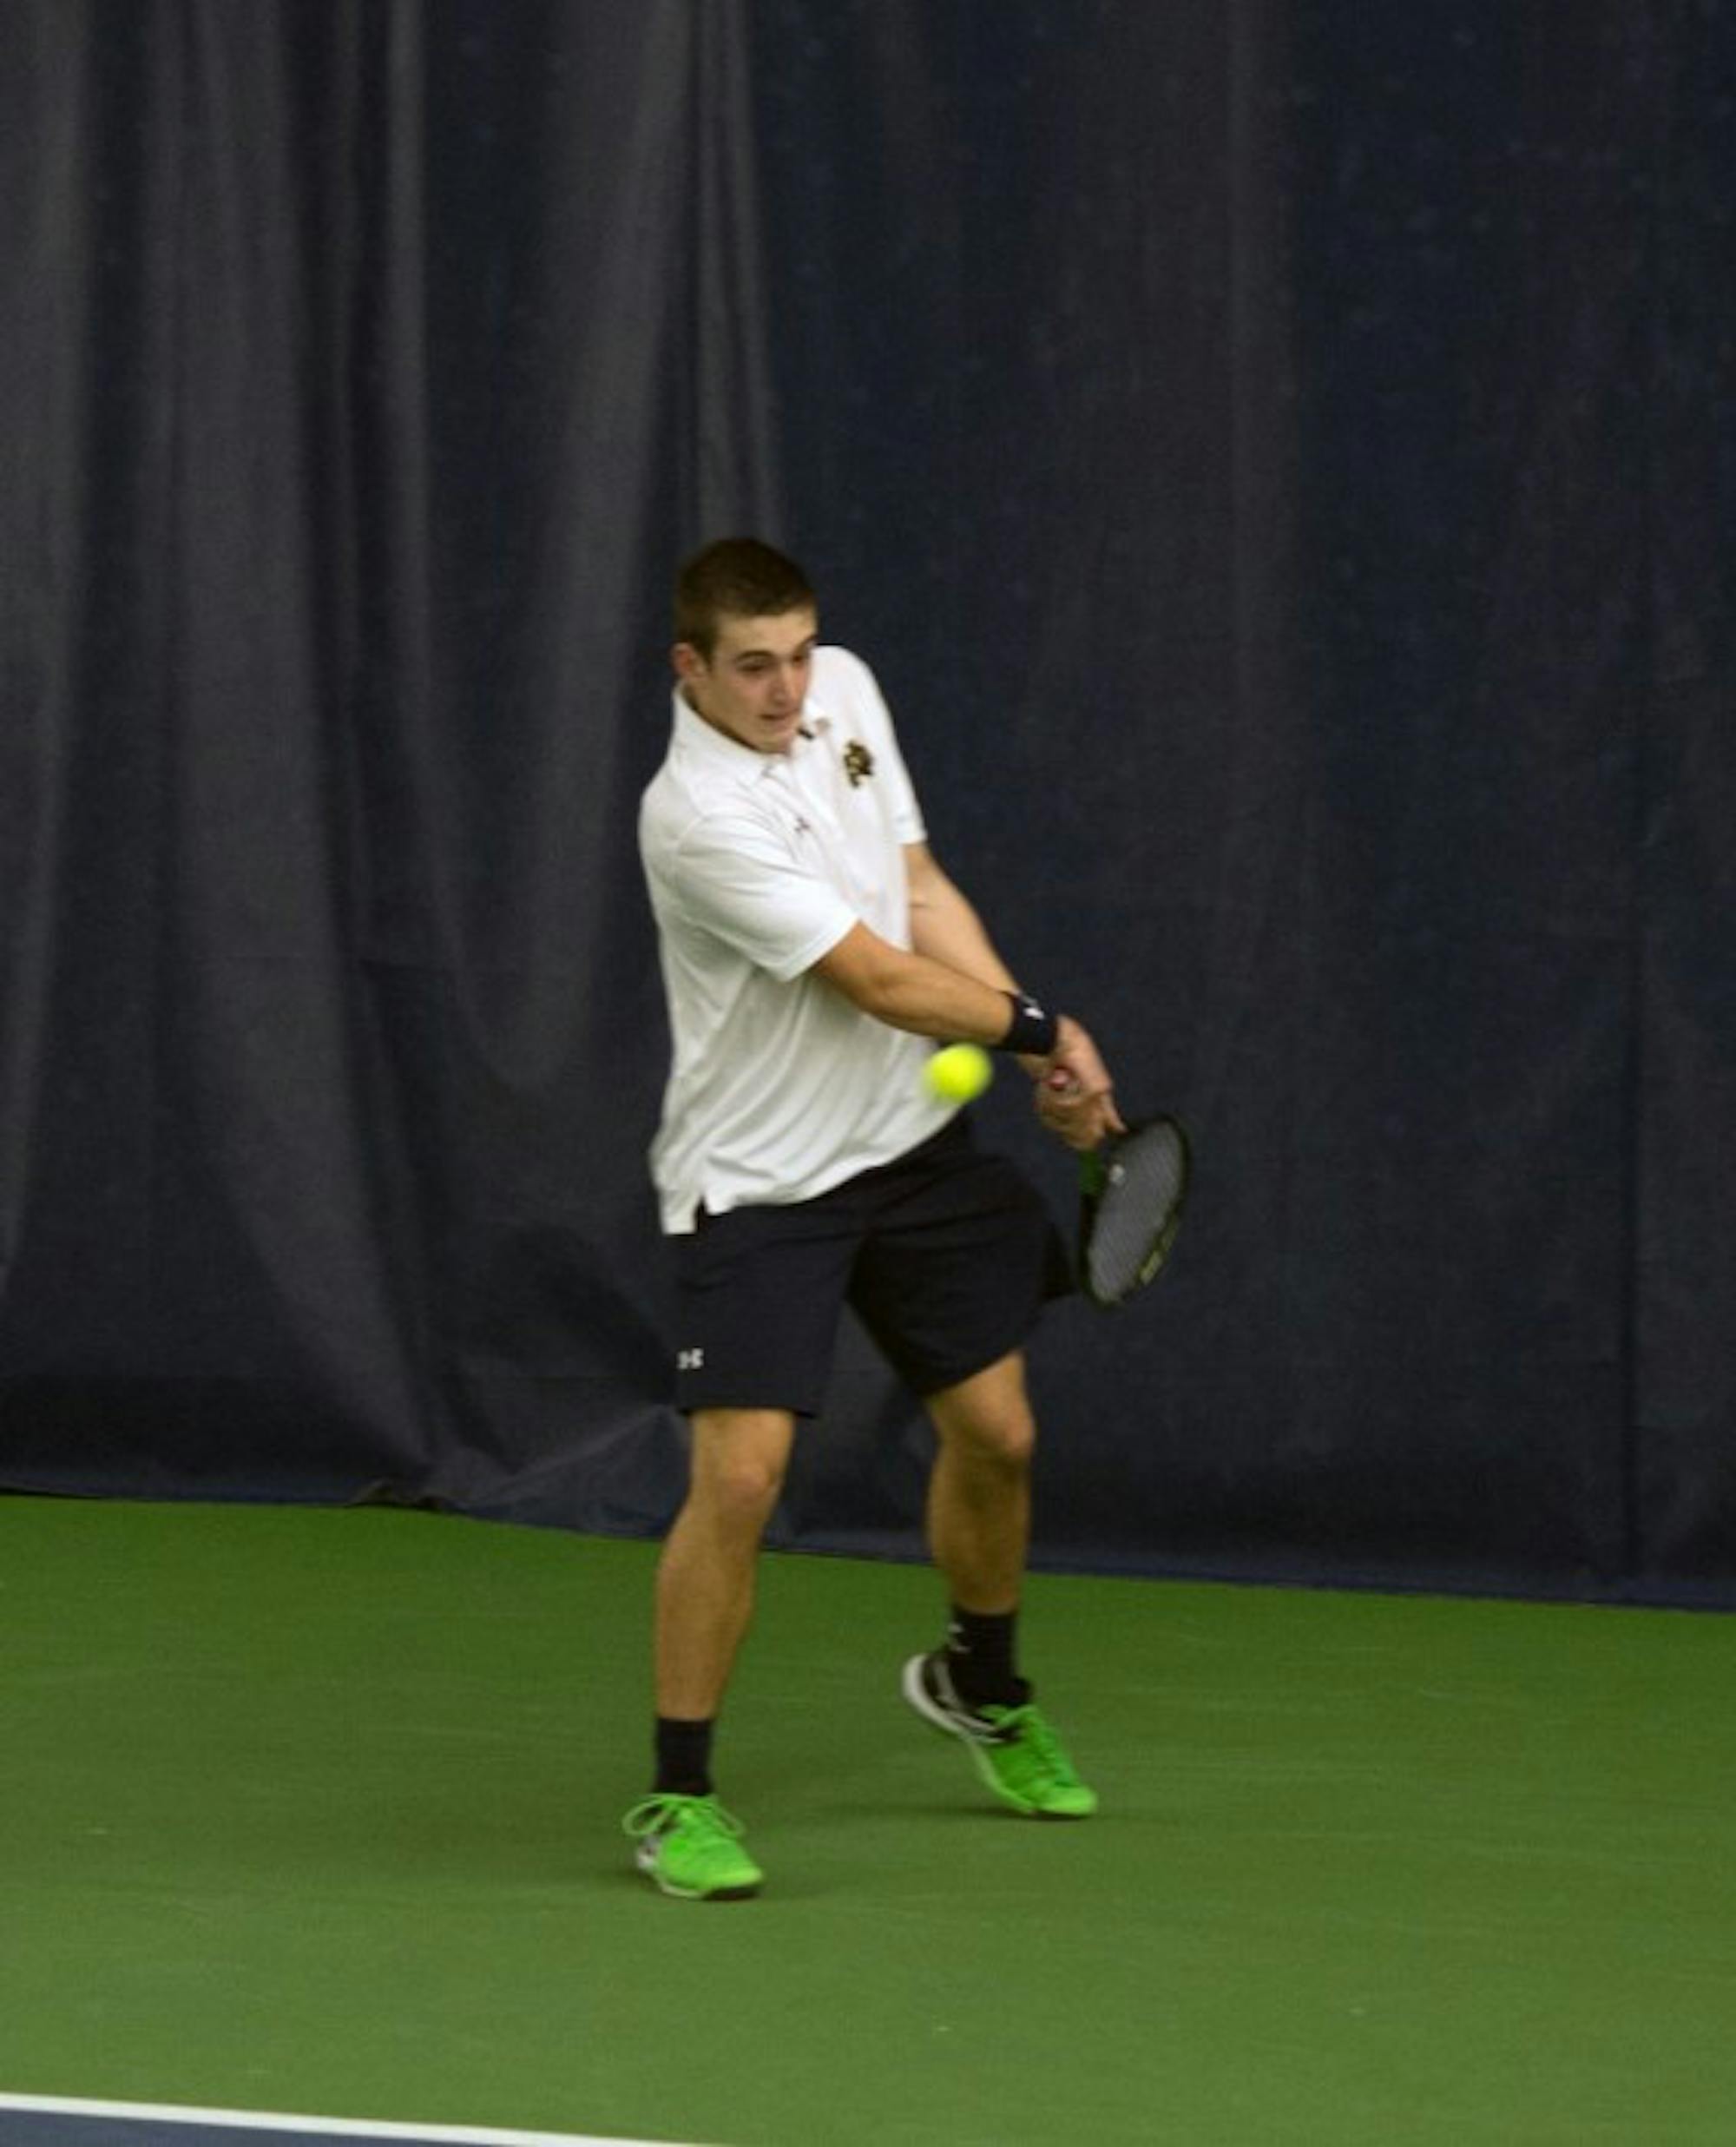 Irish freshman Nathan Griffin steps into a backhand during Notre Dame’s 7-0 win over Ball State on Feb. 7 at Eck Tennis Pavilion.